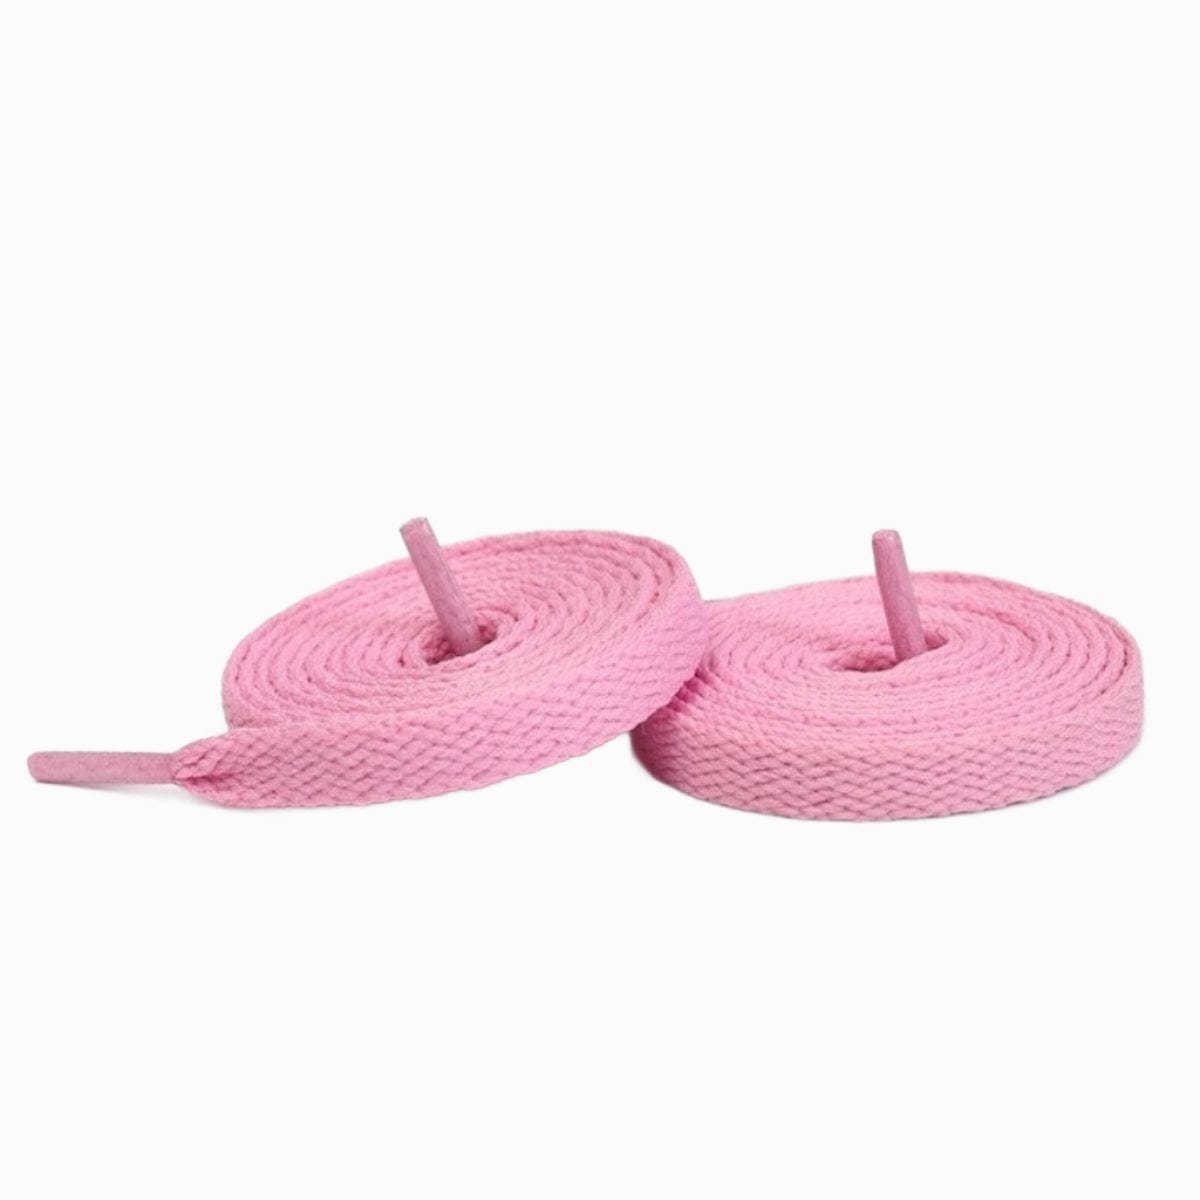 Pink Replacement Converse Laces for CONS AS-1 Pro Sneakers by Kicks Shoelaces